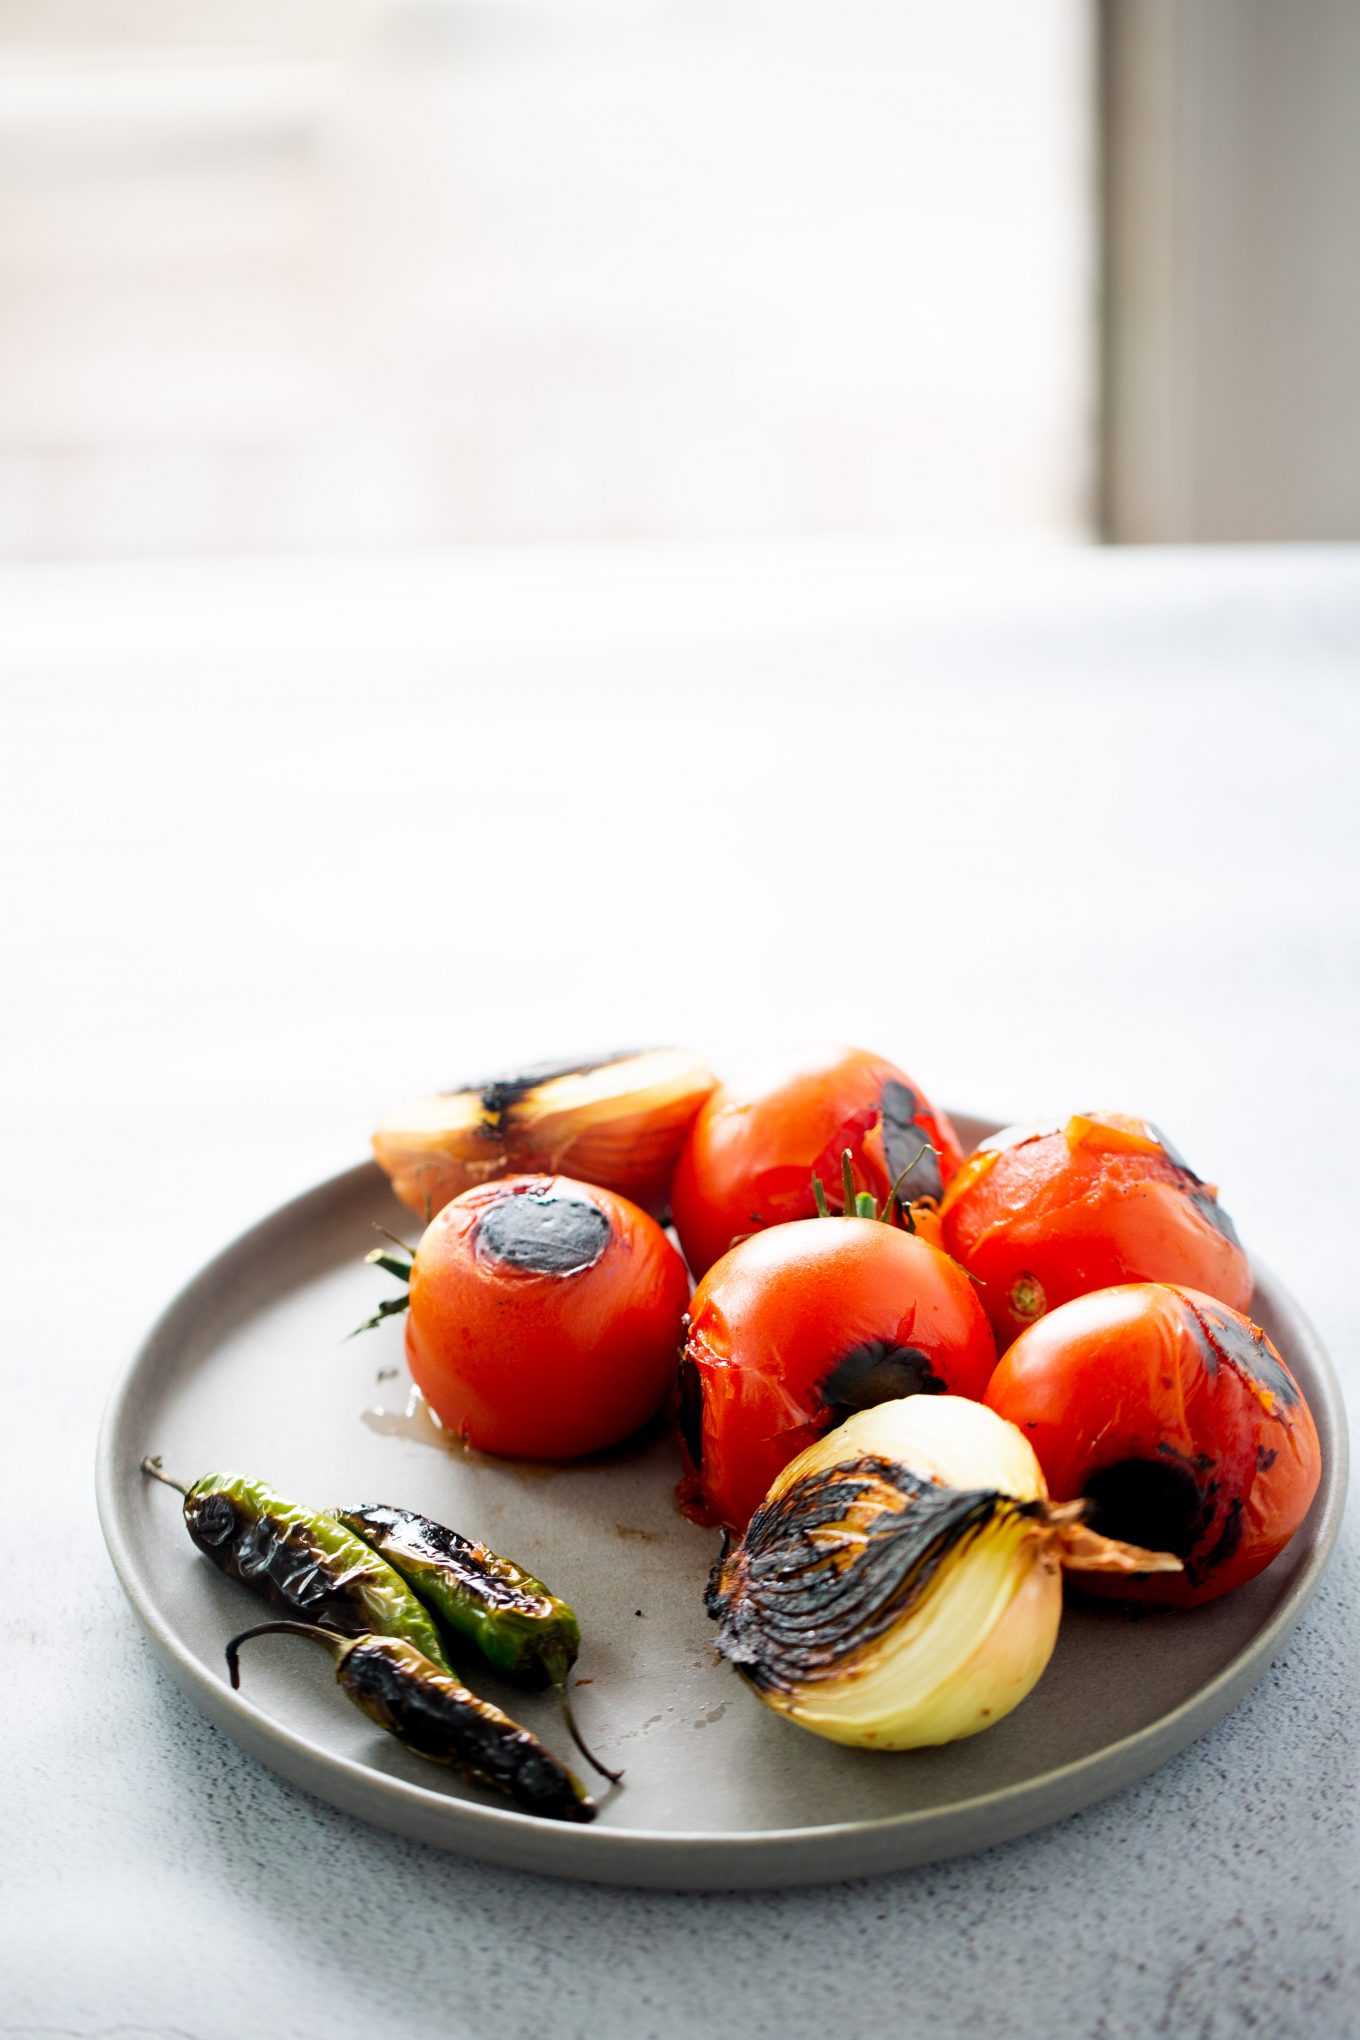 roasted tomato, onion and serranos on a gray plate ingredients